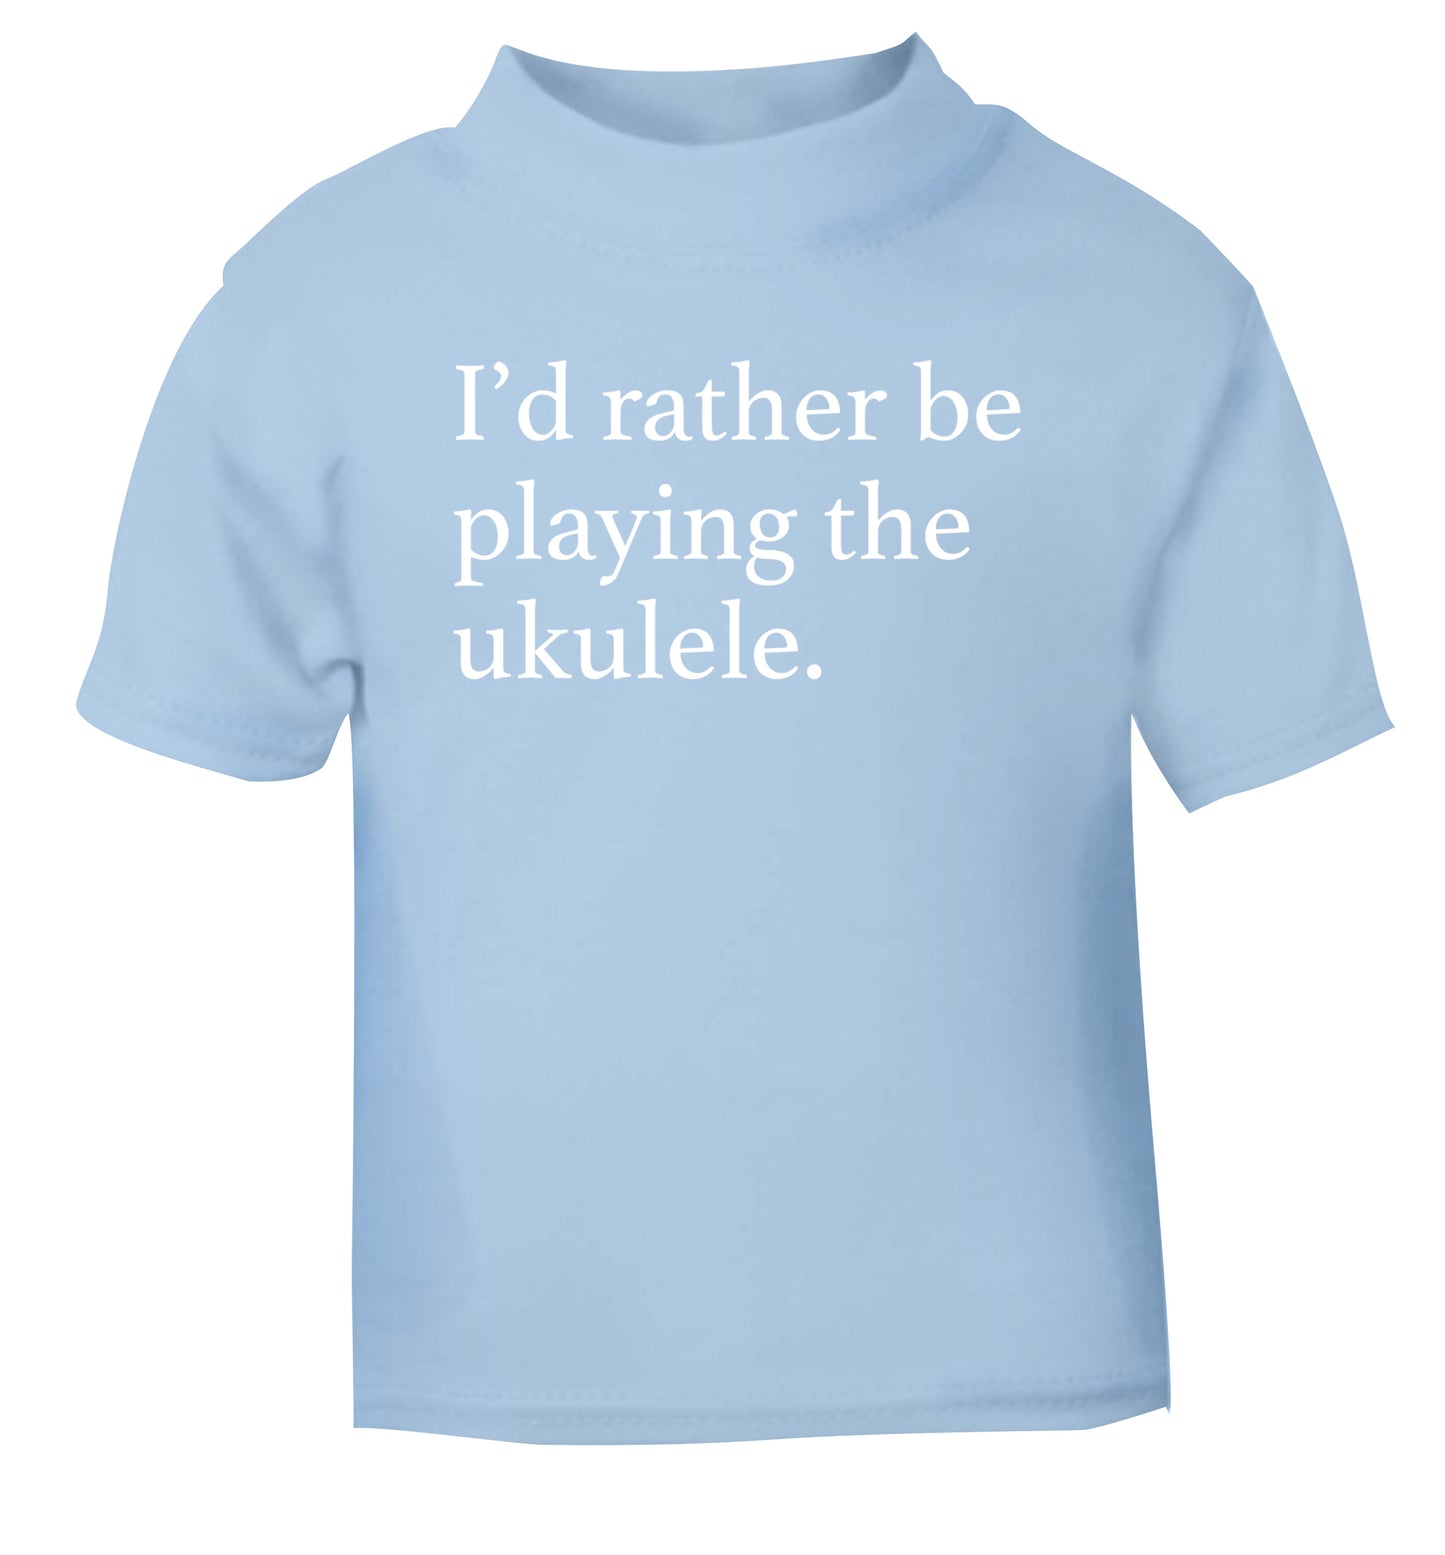 I'd rather by playing the ukulele light blue Baby Toddler Tshirt 2 Years